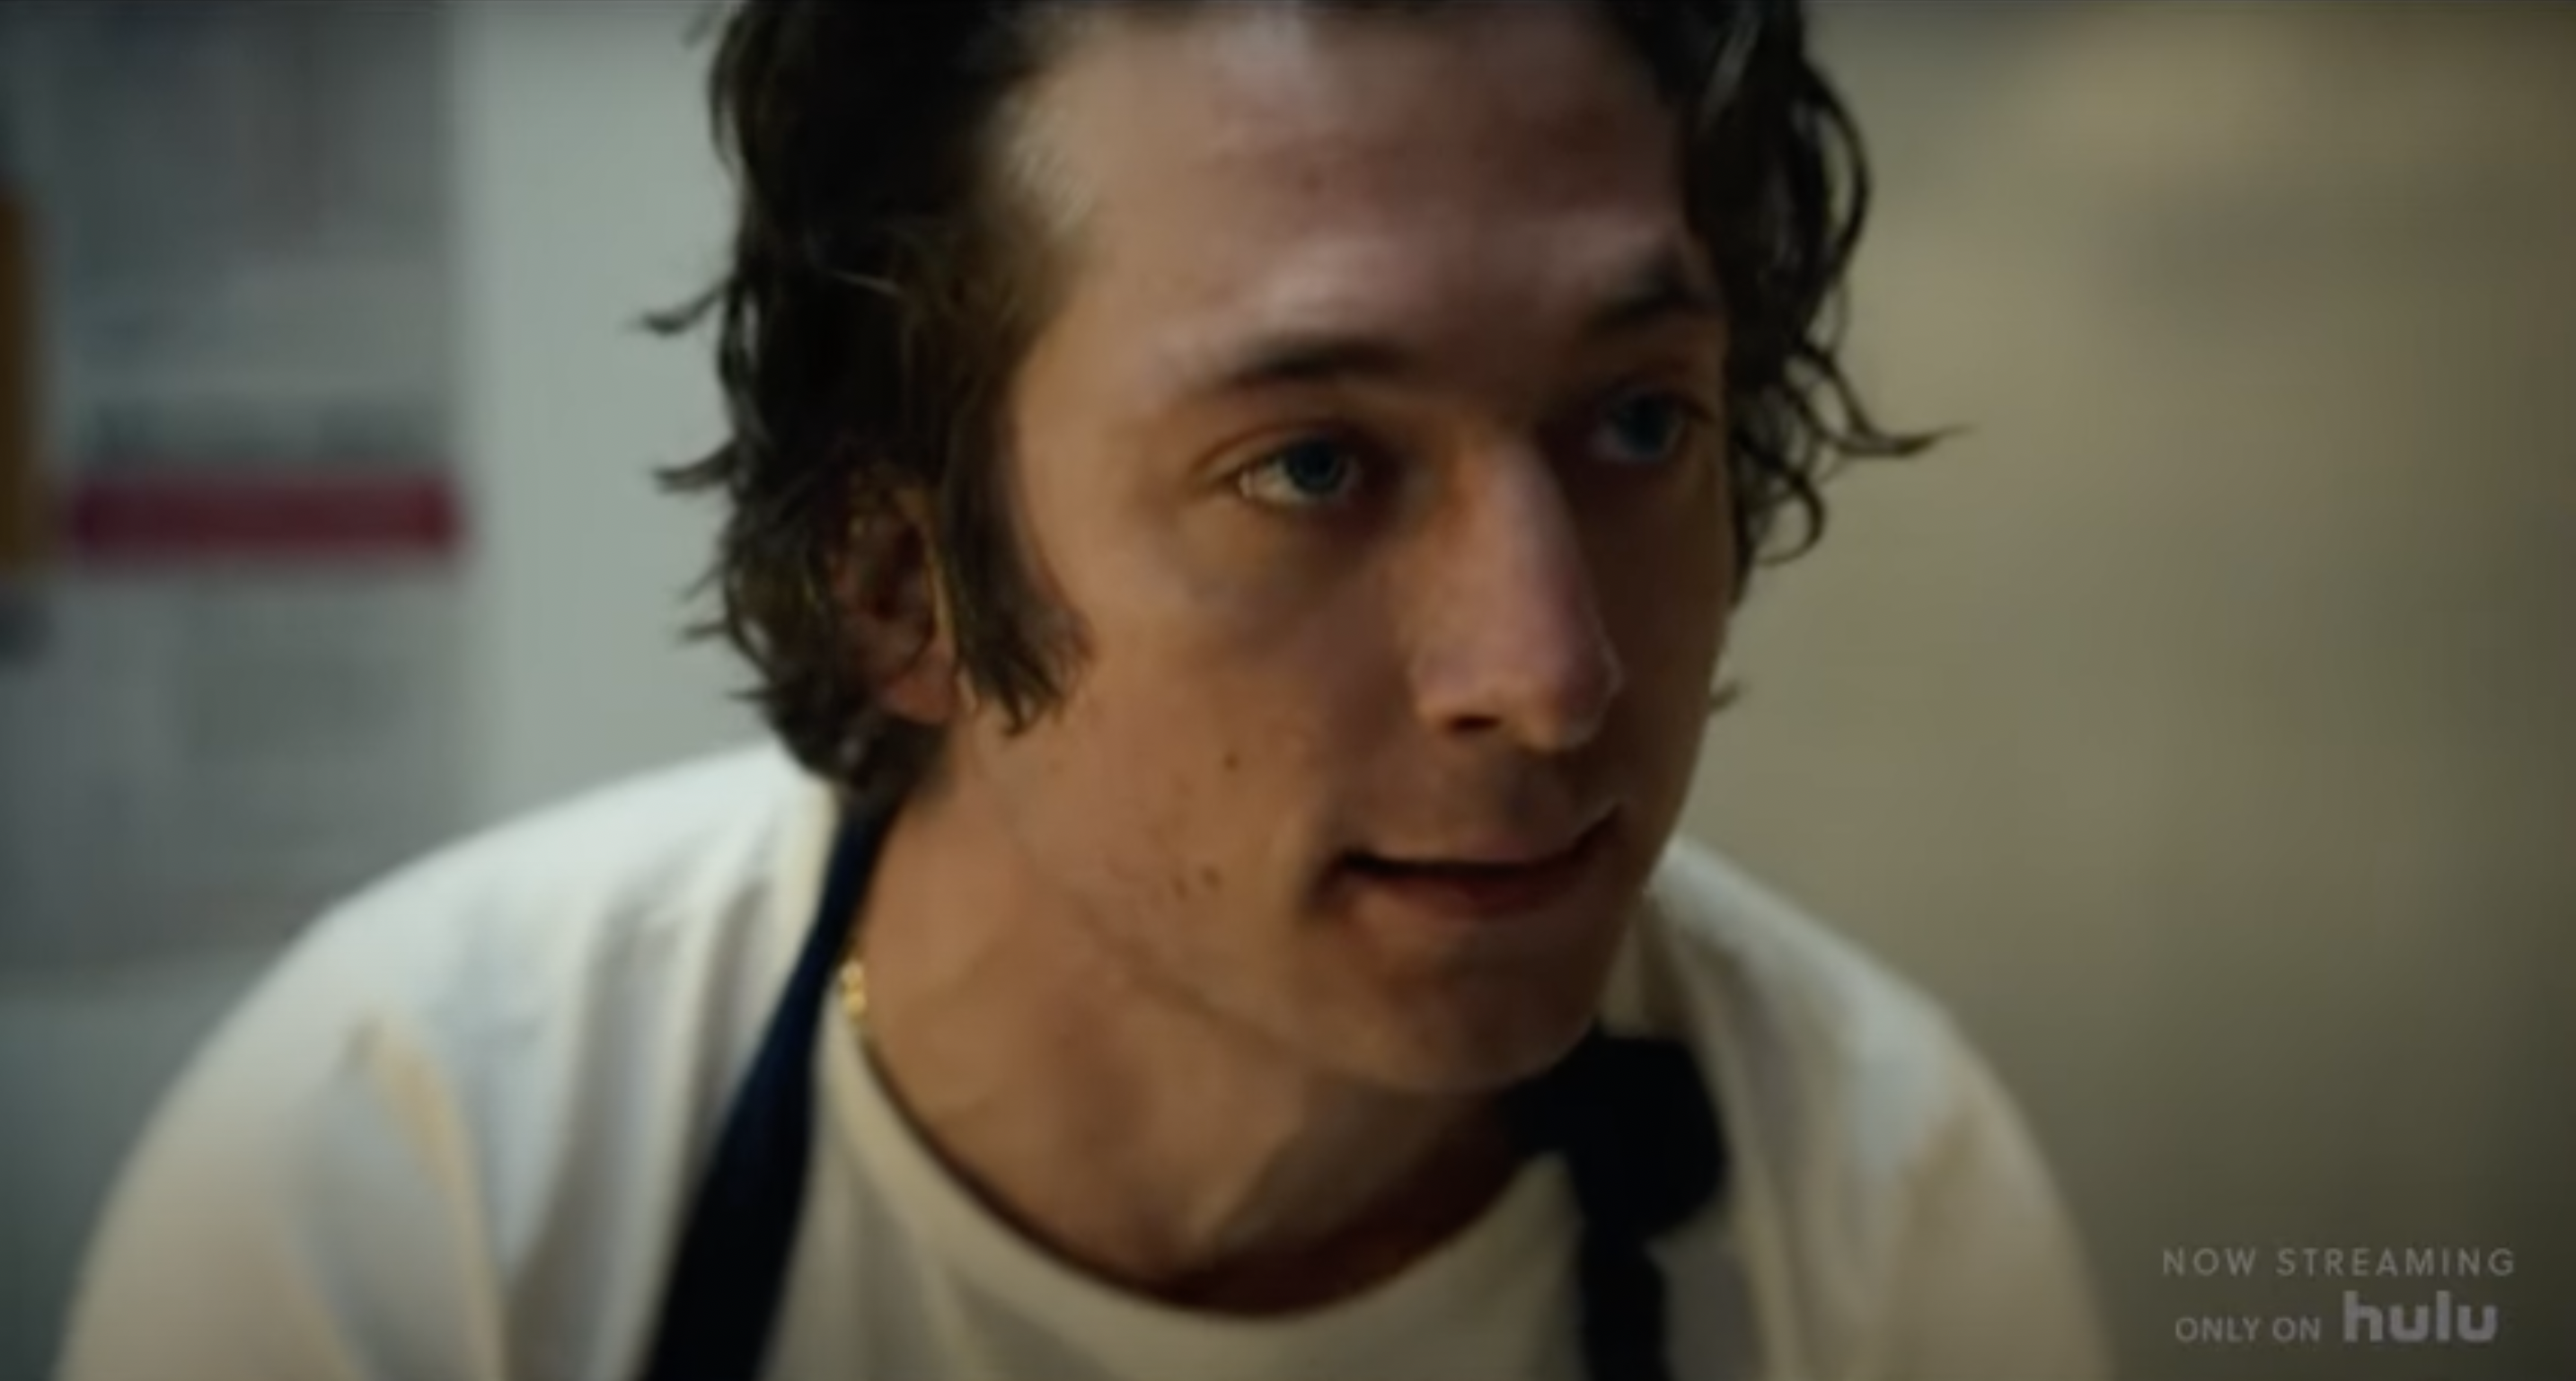 Jeremy Allen White as Chef Carmy in a scene from "The Bear," published on January 27, 2023  | Source: Youtube/fxnetwork